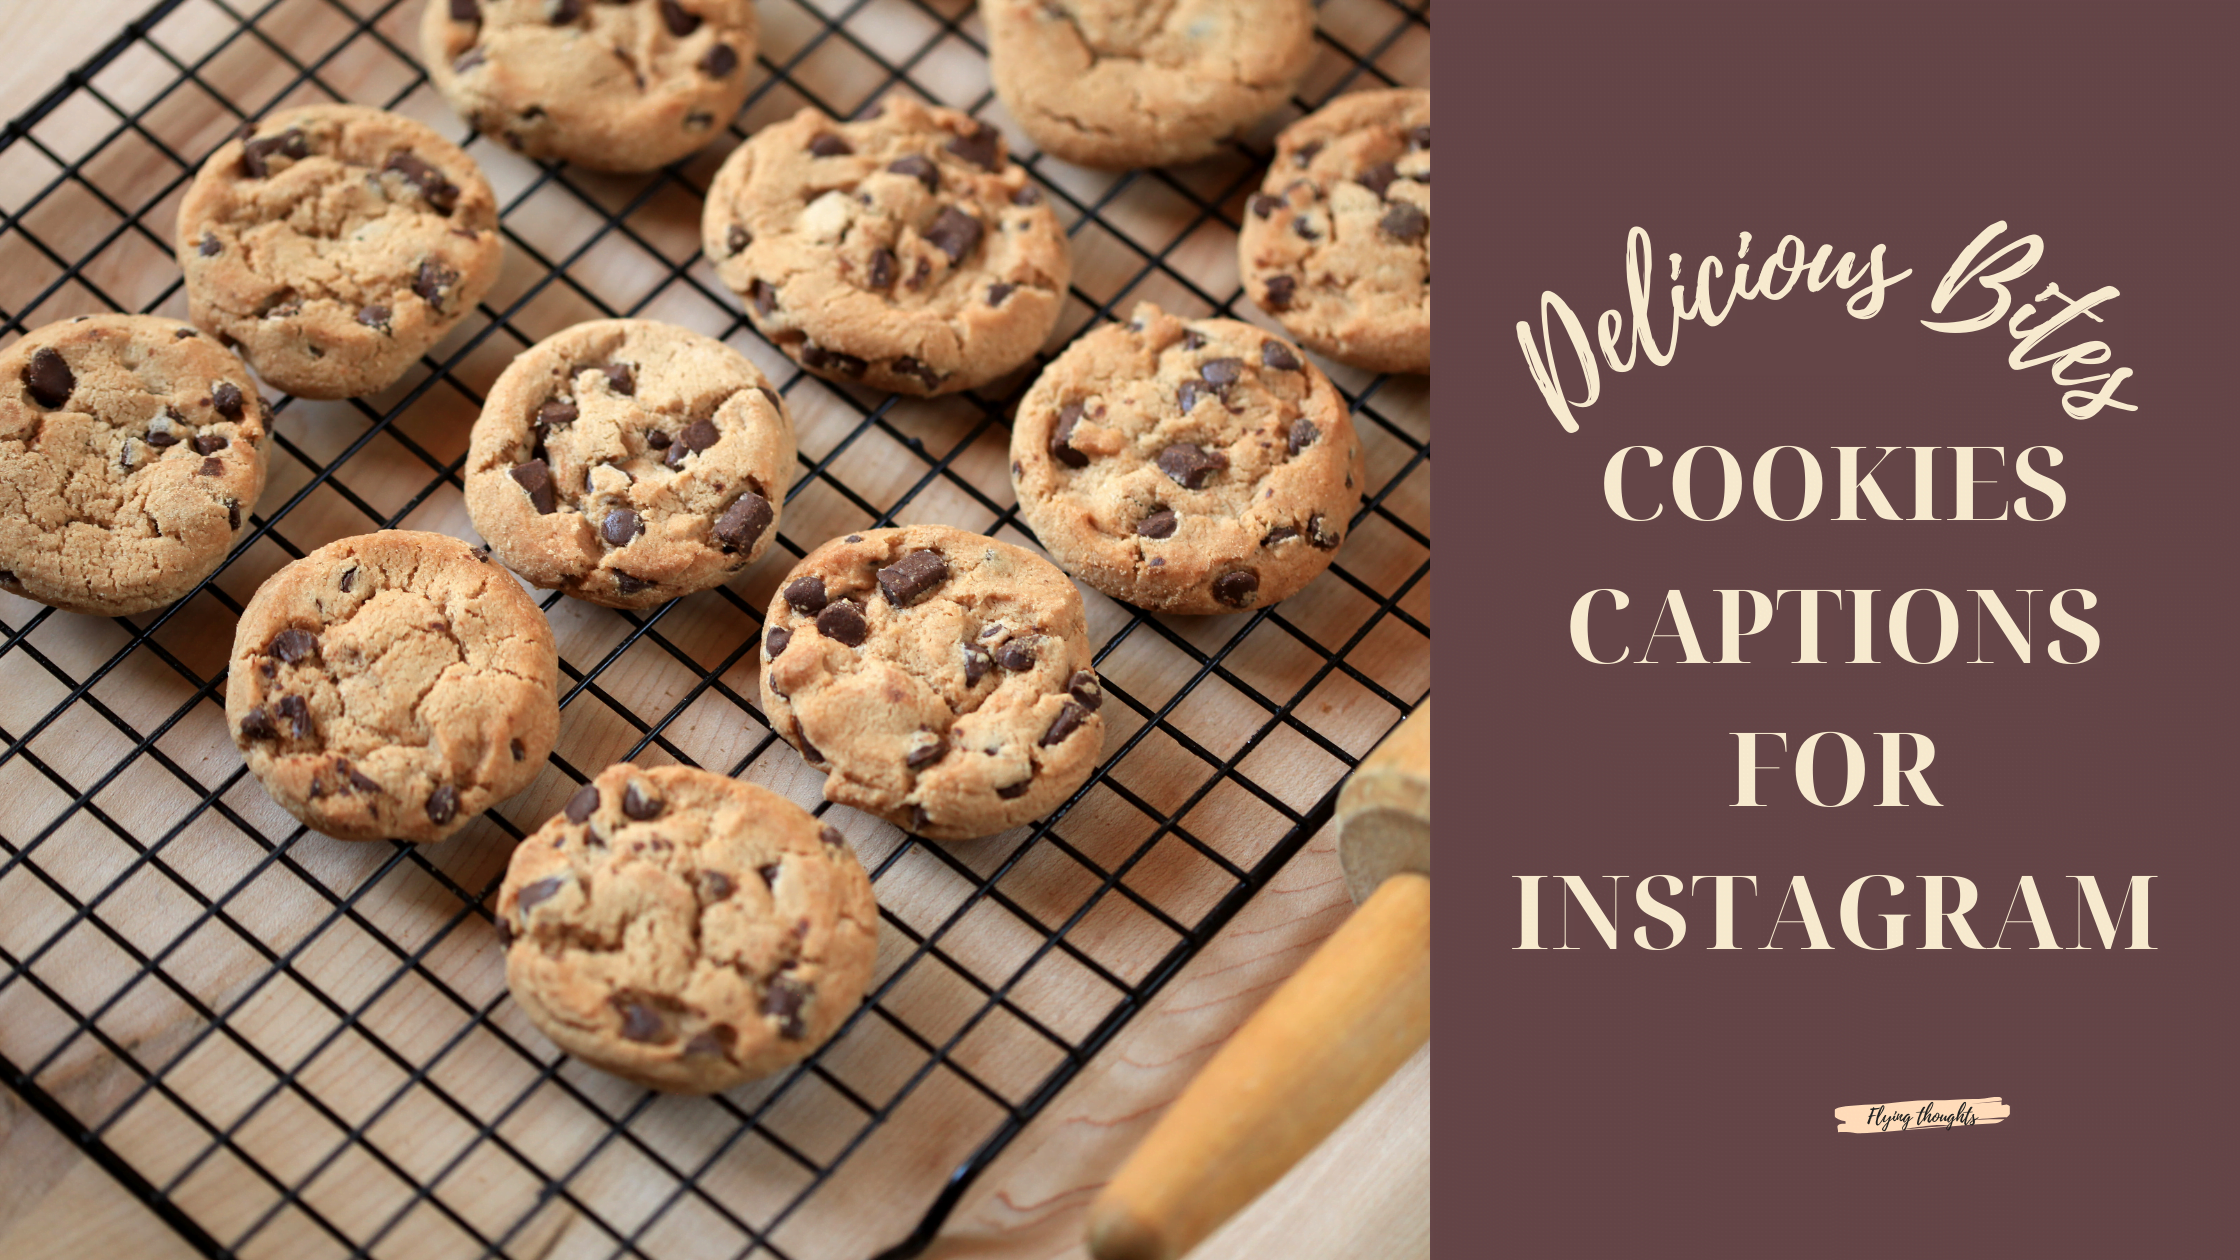 Delicious Bites: Cookies Captions for Instagram to Sweeten Your Feed”